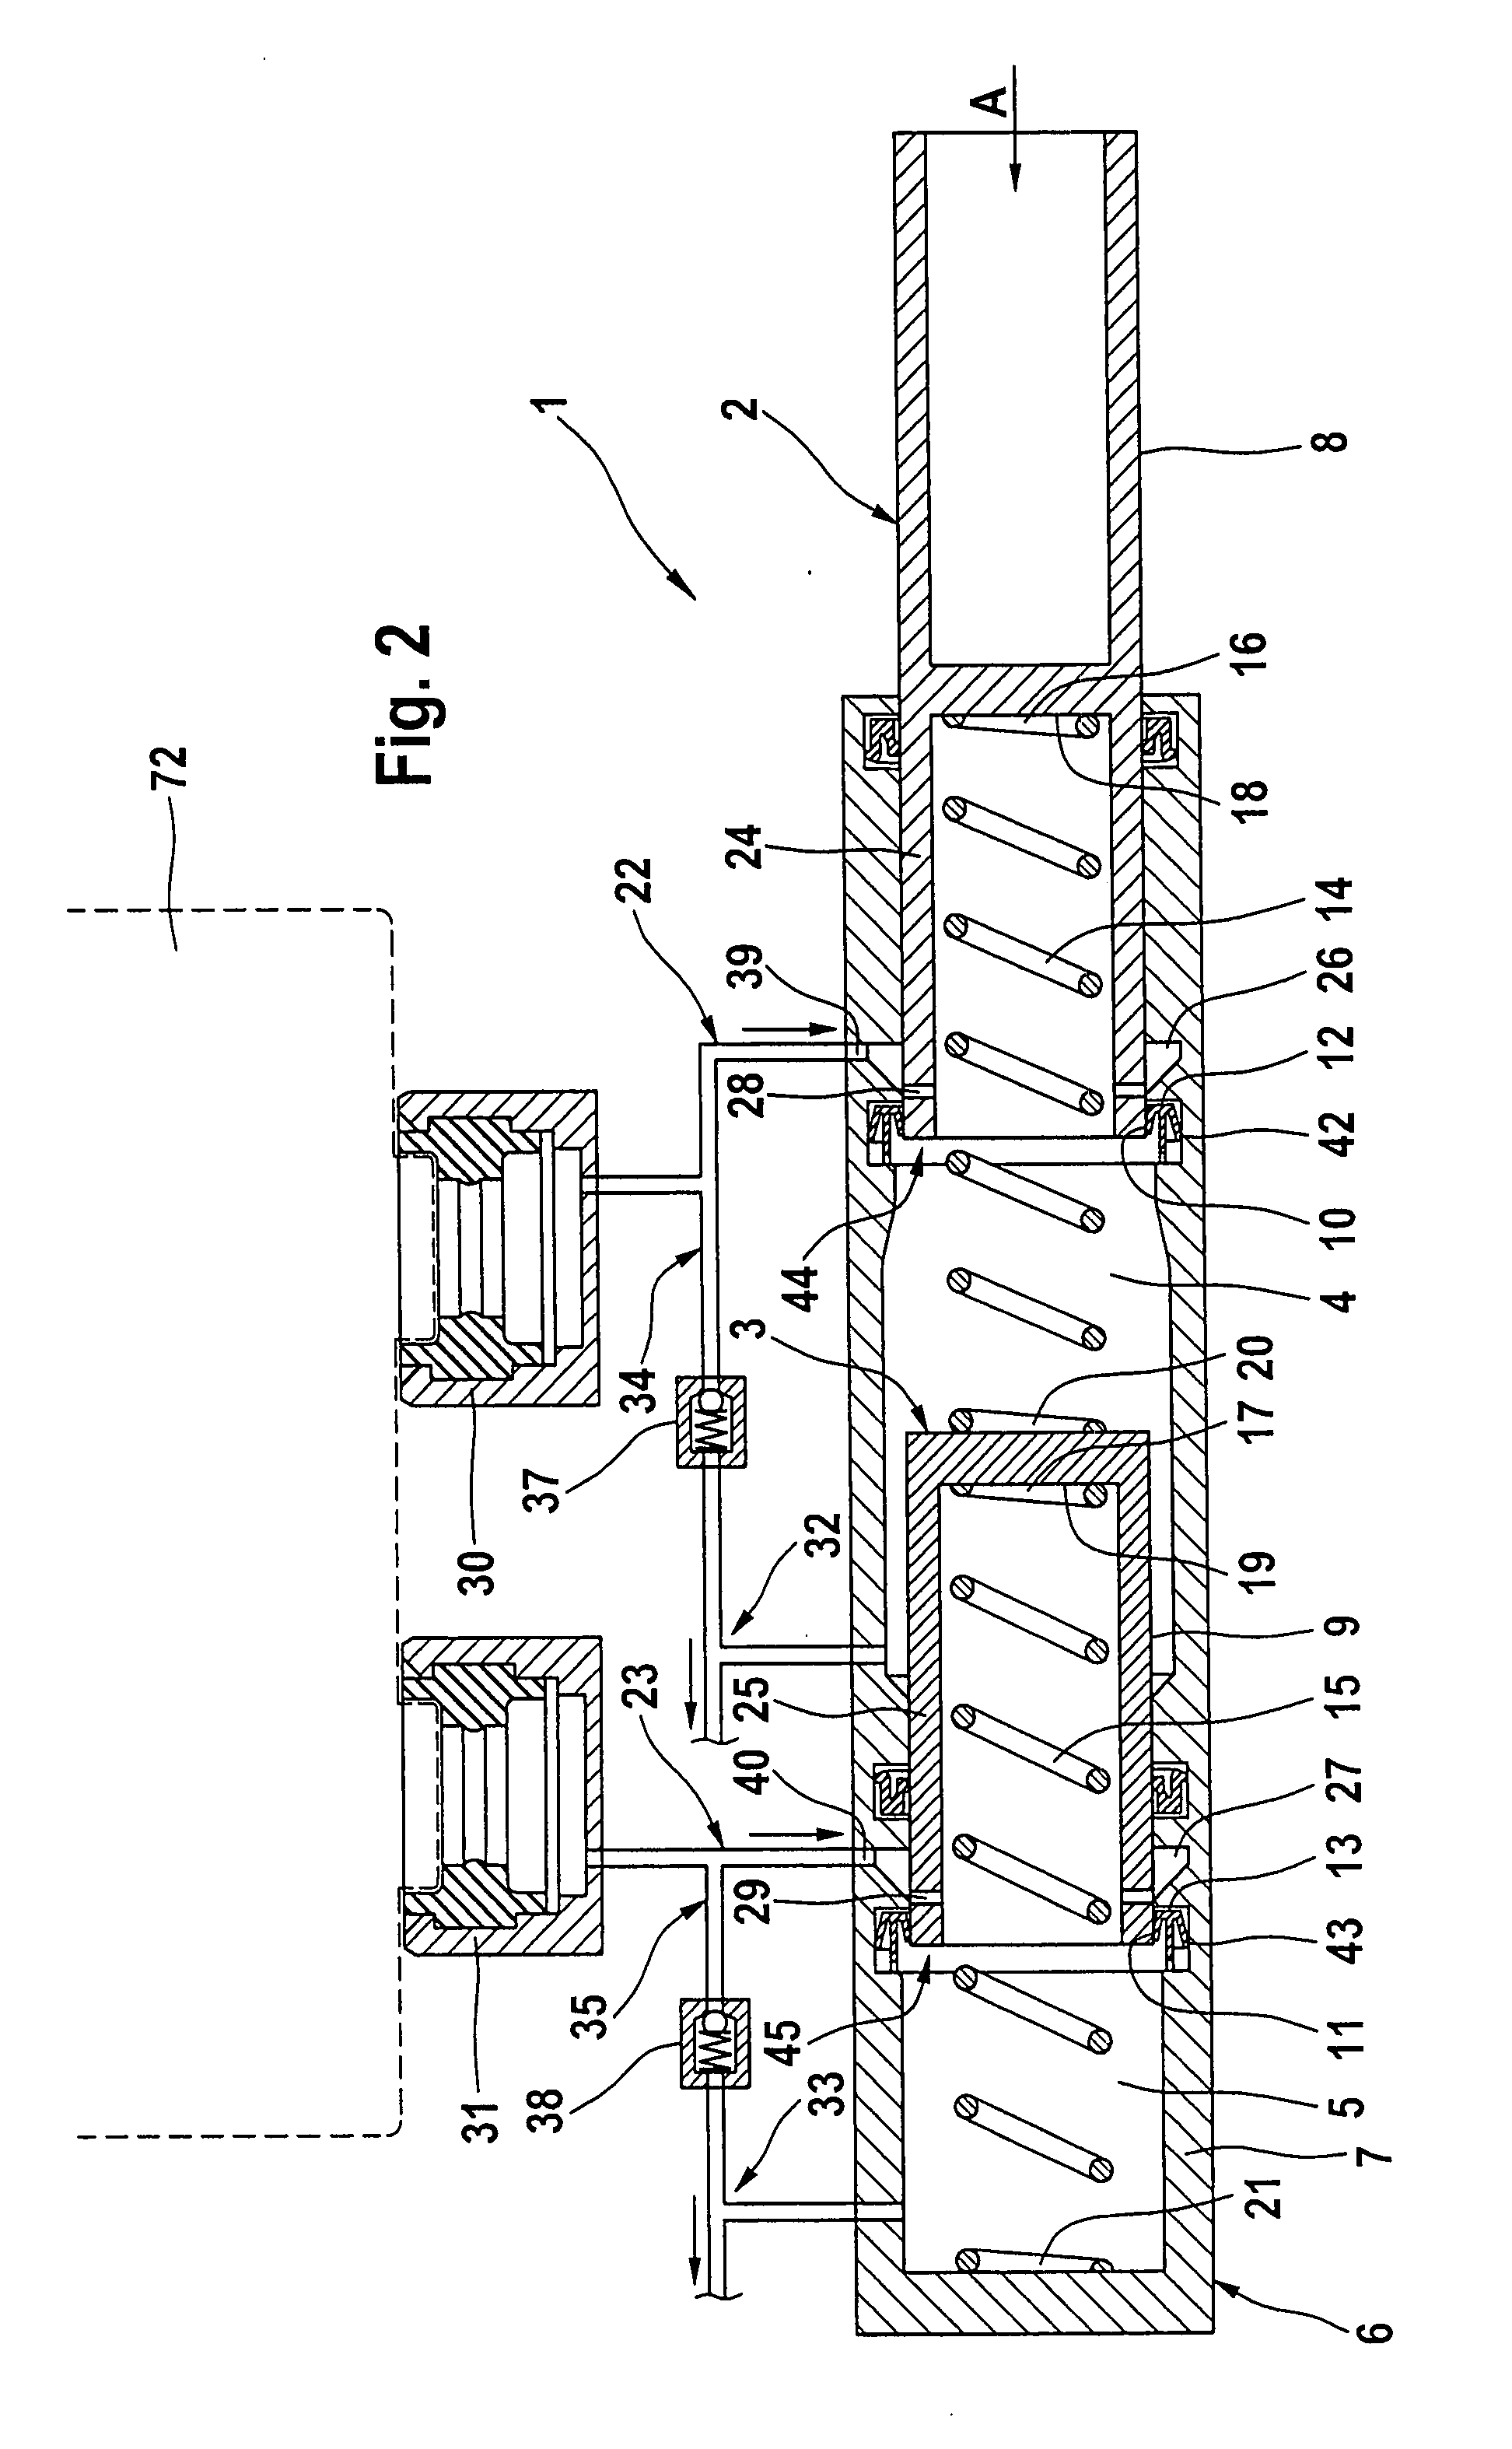 Electrohydraulic Braking System Comprising Vehicle Dynamics Control